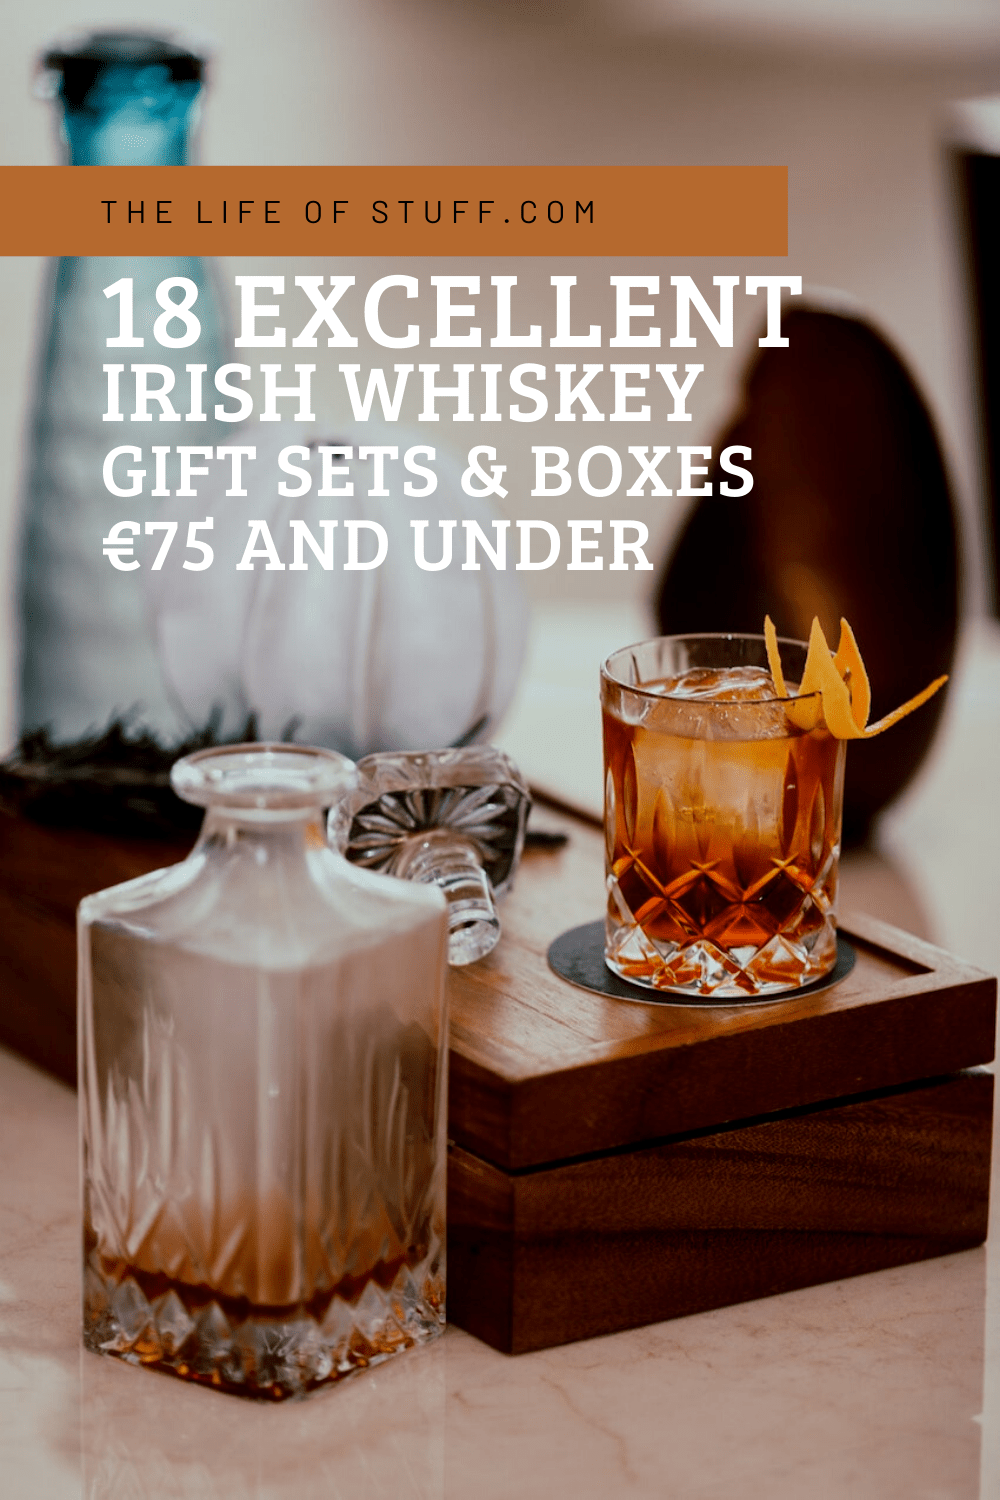 The Life of Stuff - 18 Excellent Irish Whiskey Gift Sets & Boxes €75 and Under